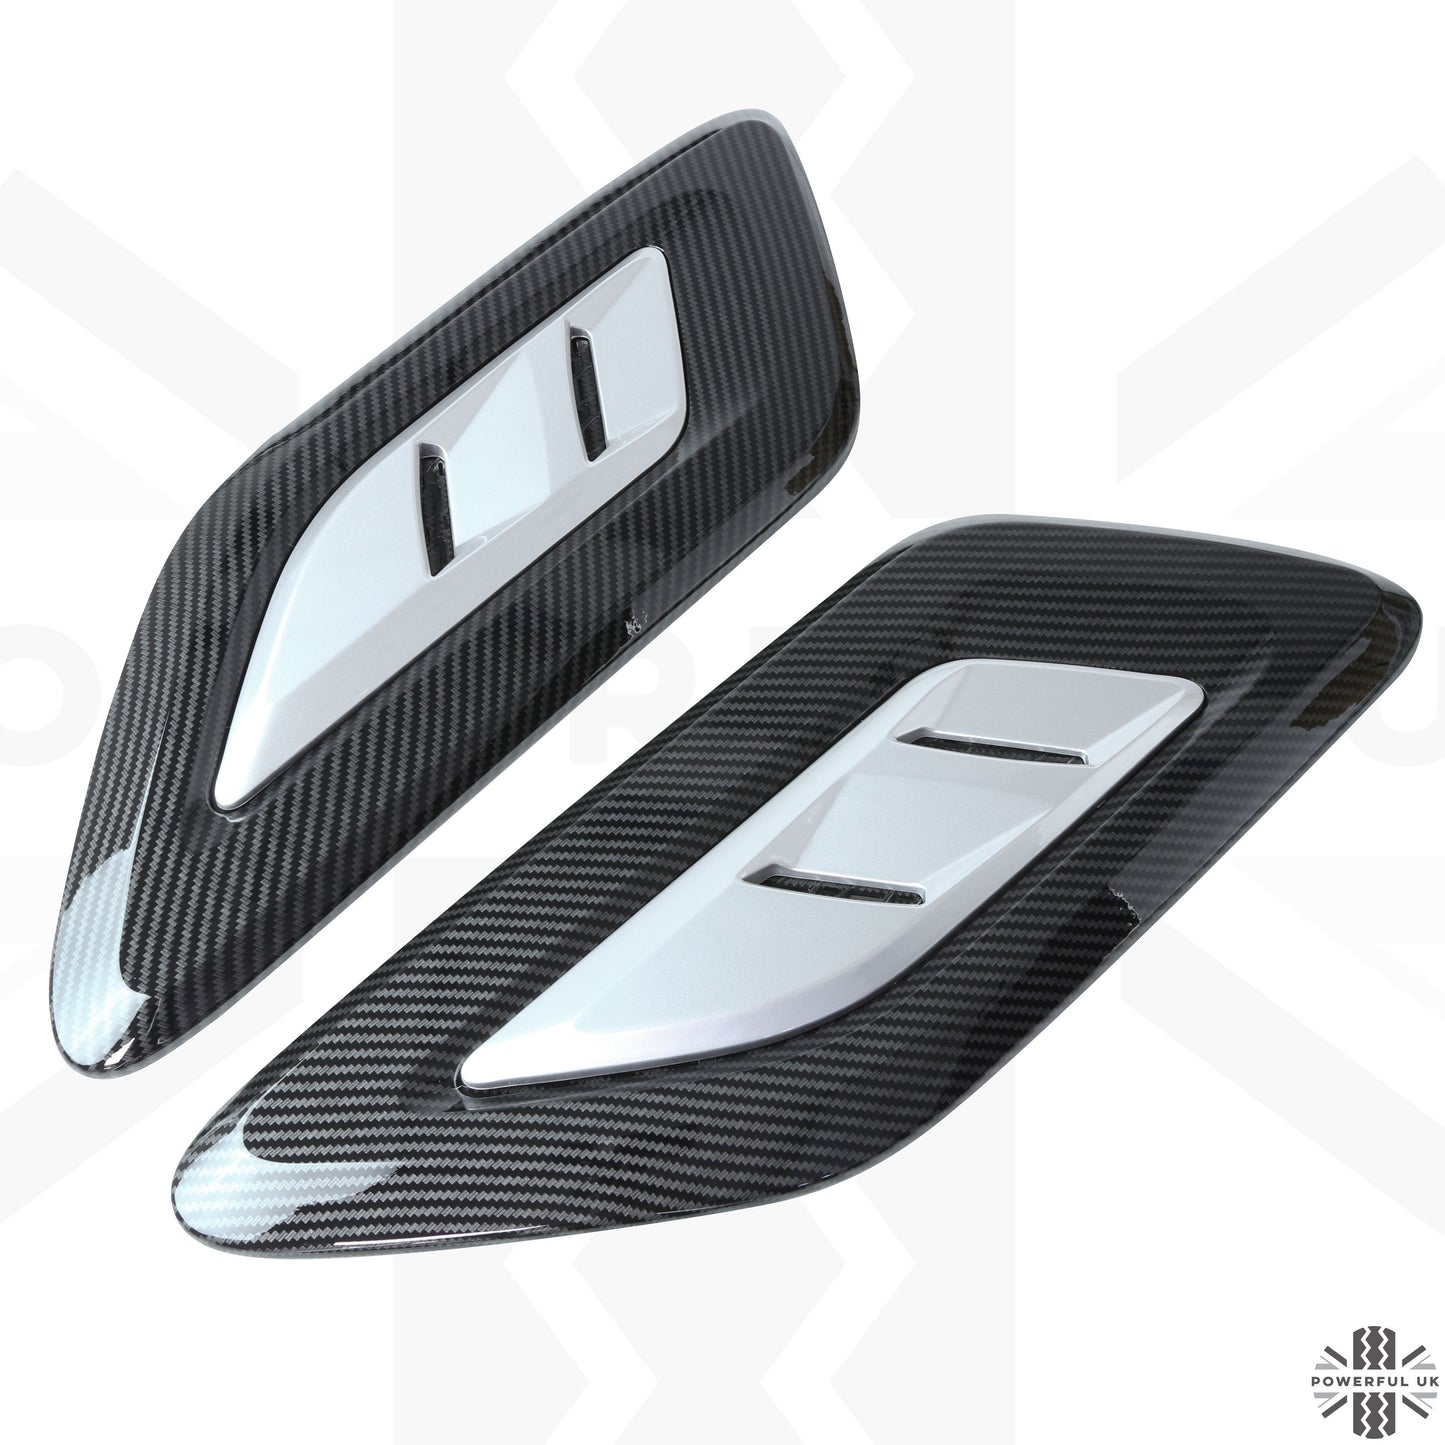 Bonnet Vents for Land Rover Discovery 3/4 - Carbon & Silver